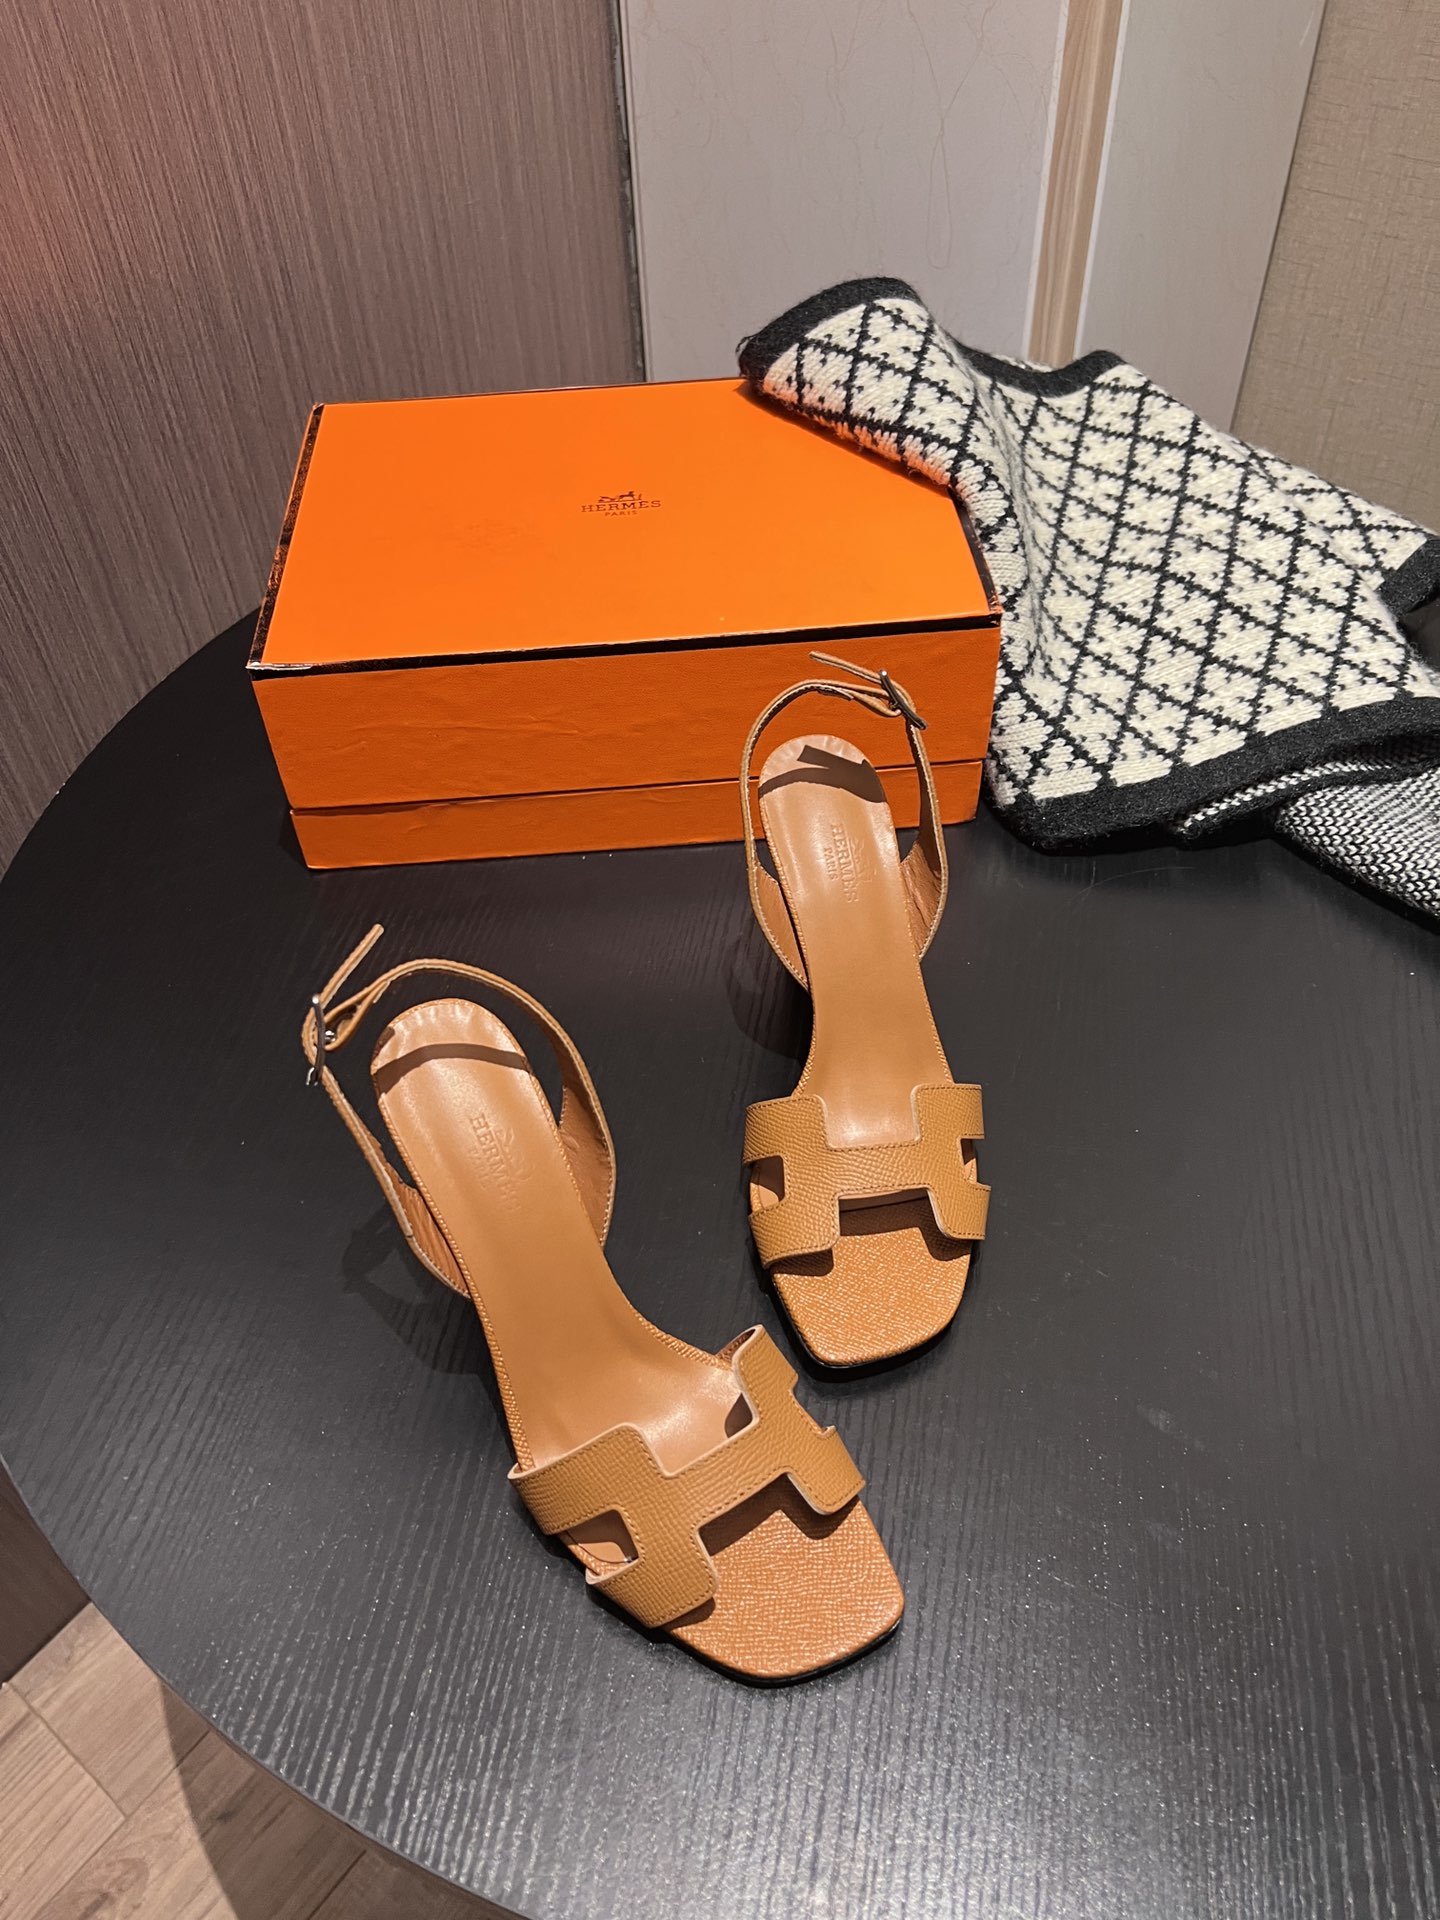 Where can I buy
 Hermes Shoes High Heel Pumps Sandals